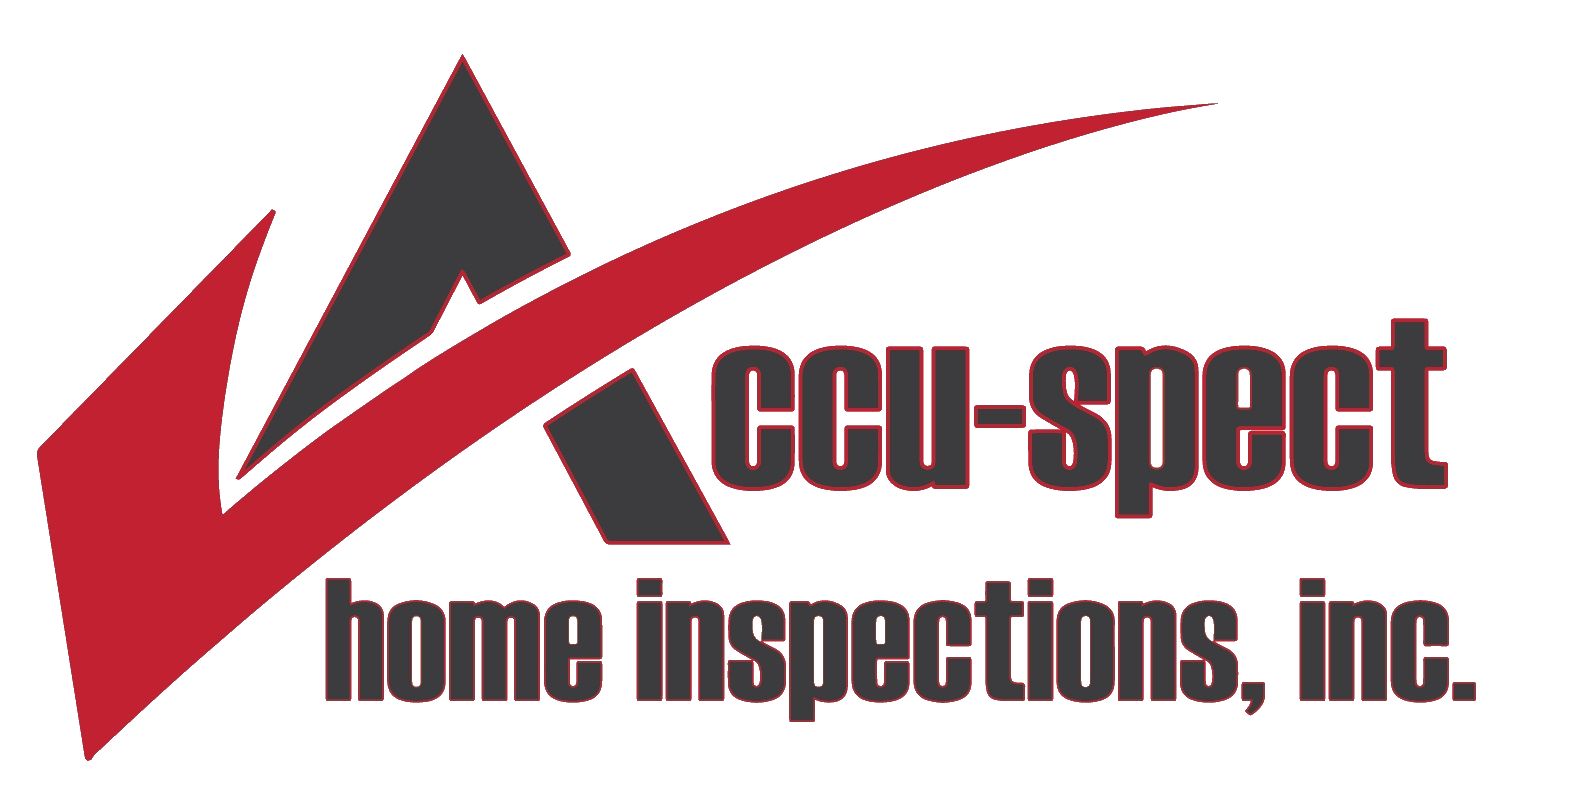 NC Home Inspector Professional Winston-Salem, Greensboro, Mount Airy, Madison, Kernersville, High Point, Lexington, East Bend, Stokesdale